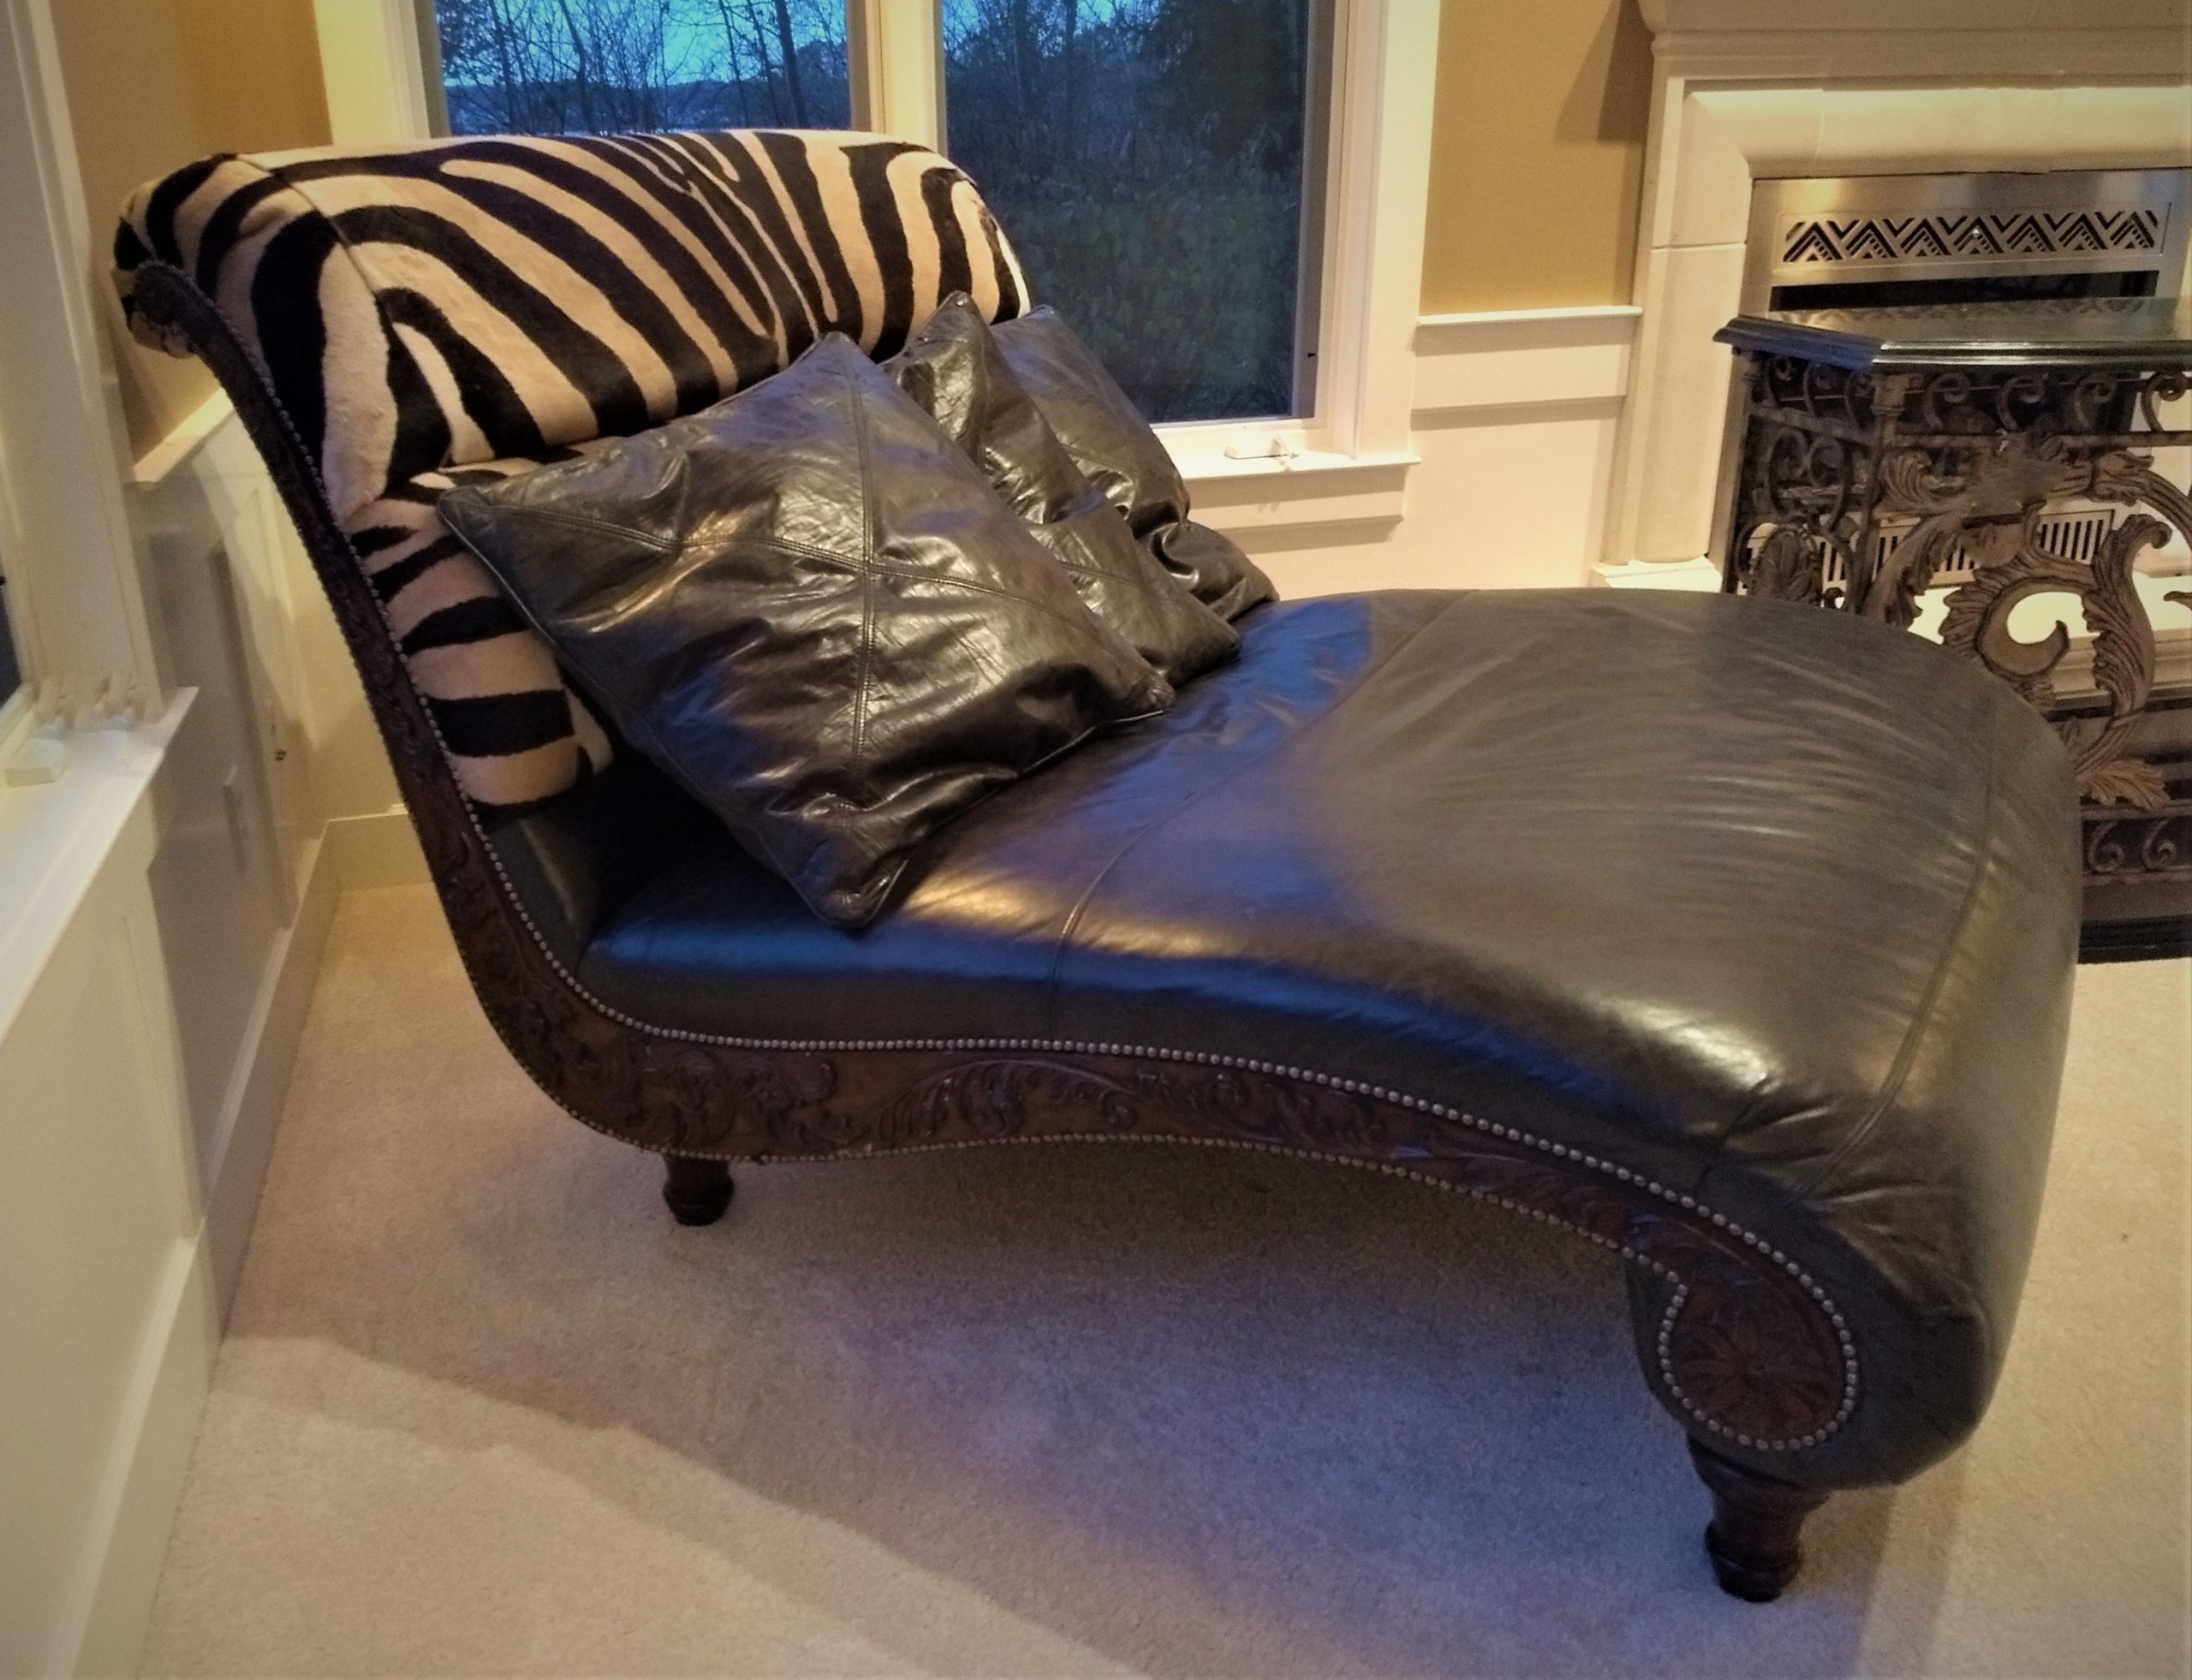 Double chaise lounge leather with zebra print upholstery 1